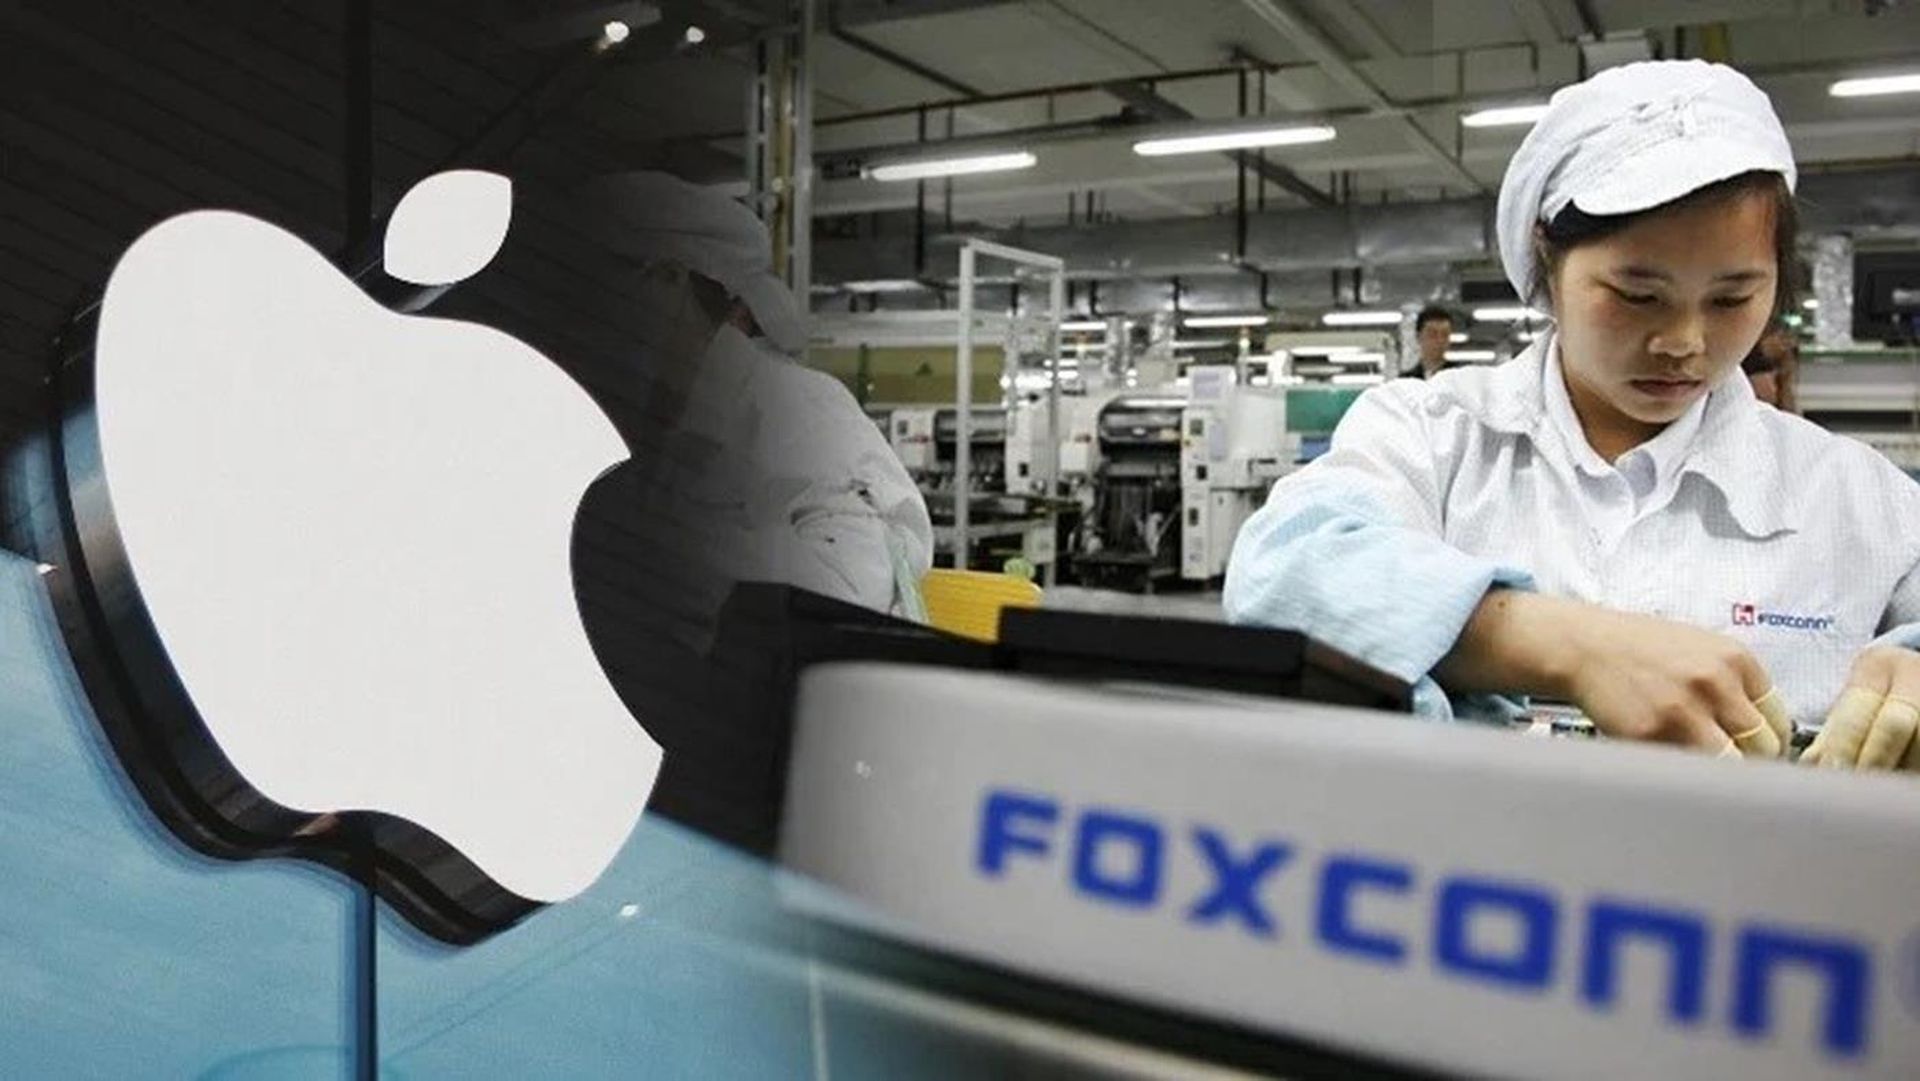 The company is looking for a new production place since Apple moving out of China rumors have become a reality